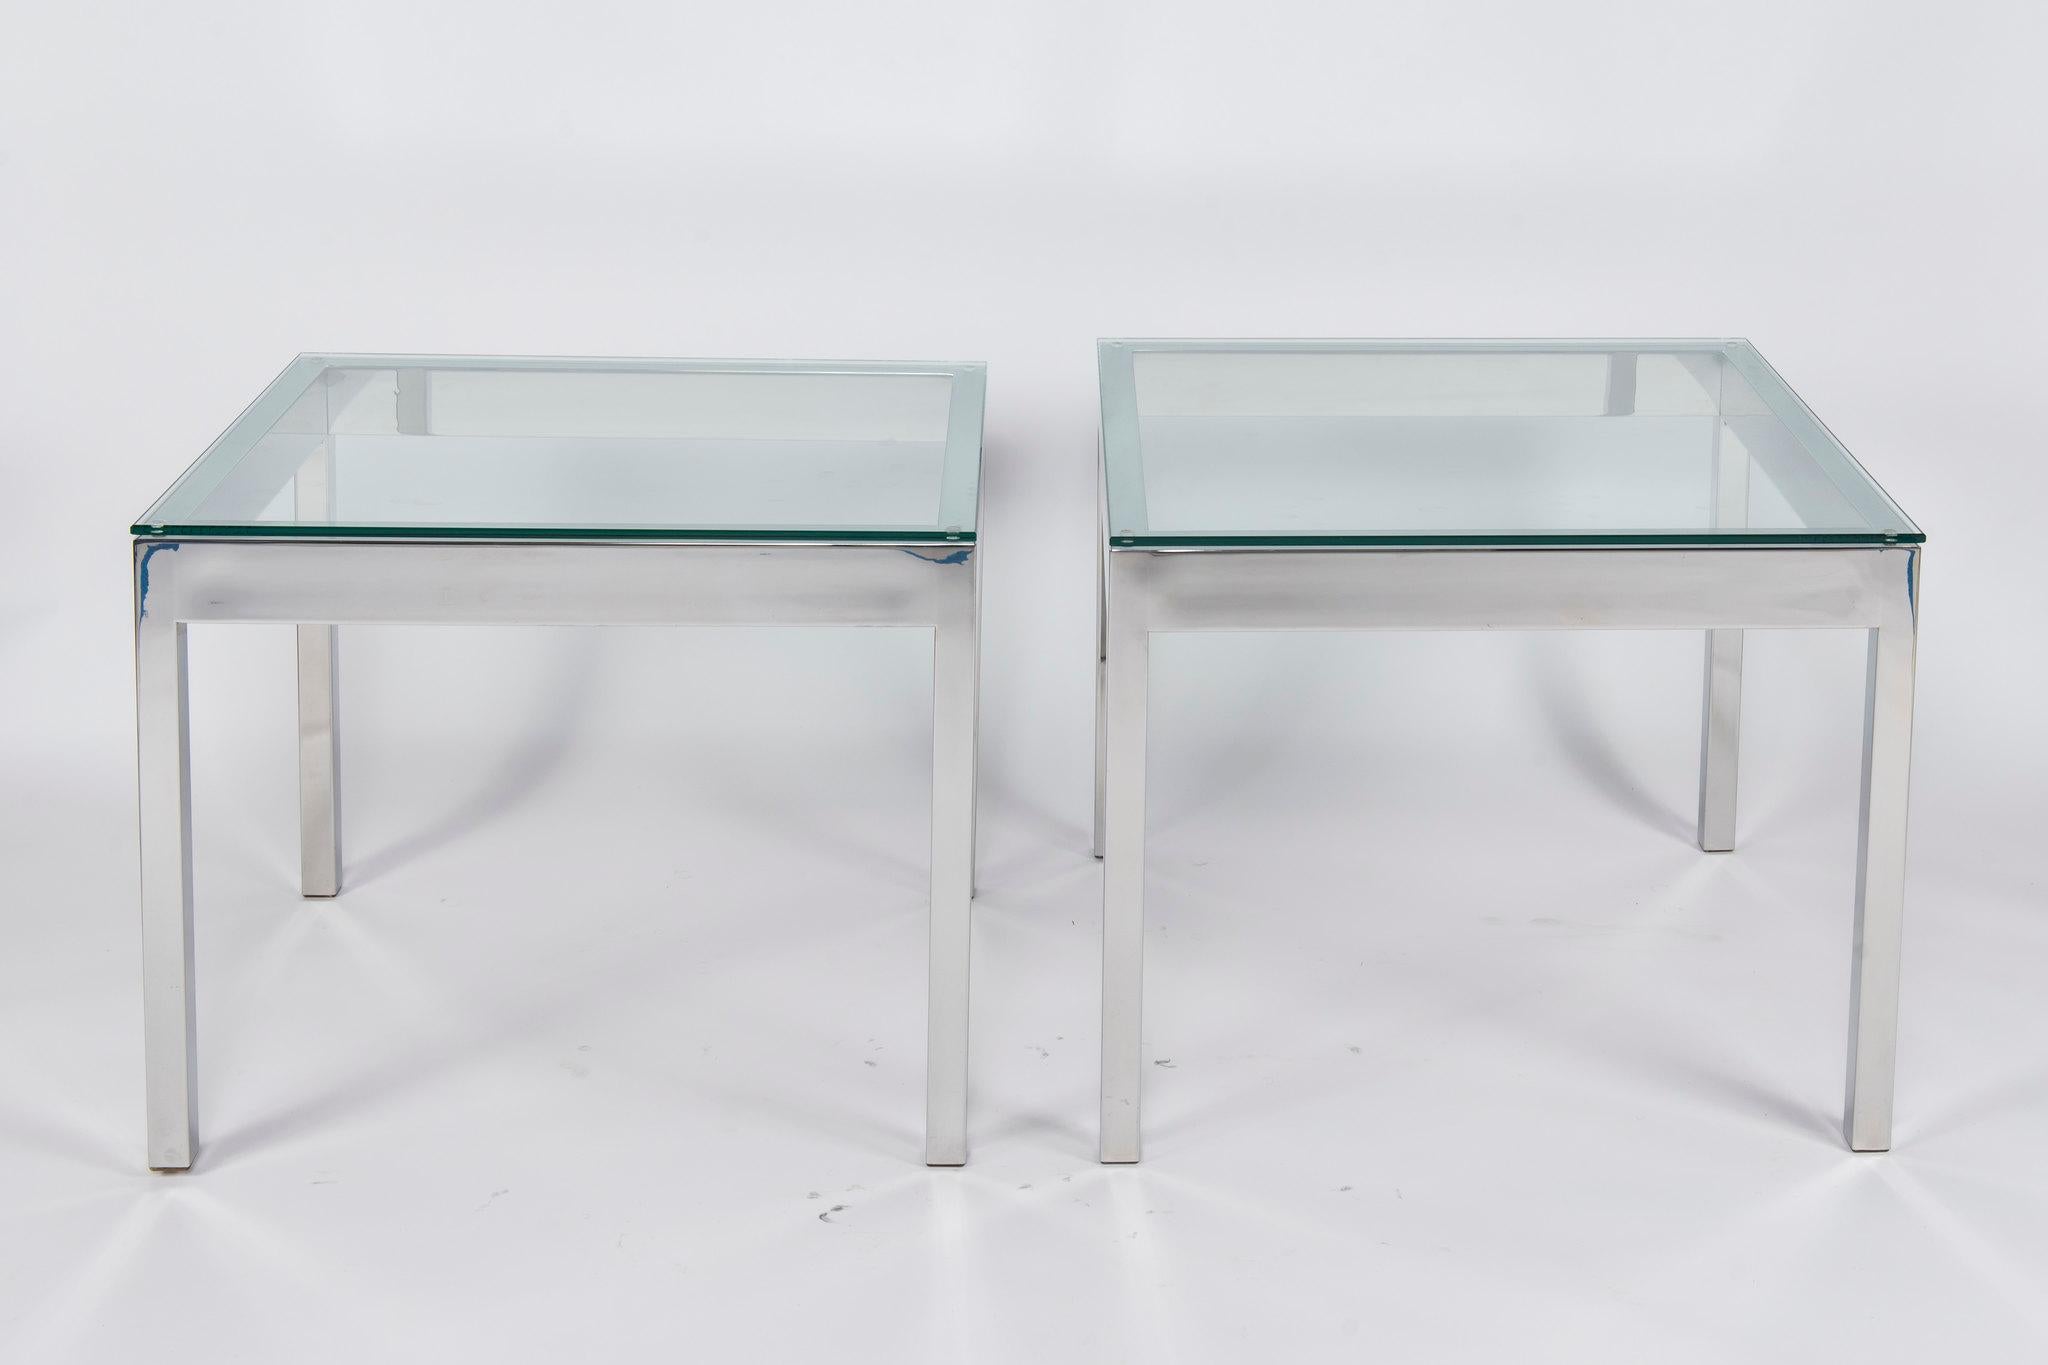 Pair of Chrome and Glass Tables 1